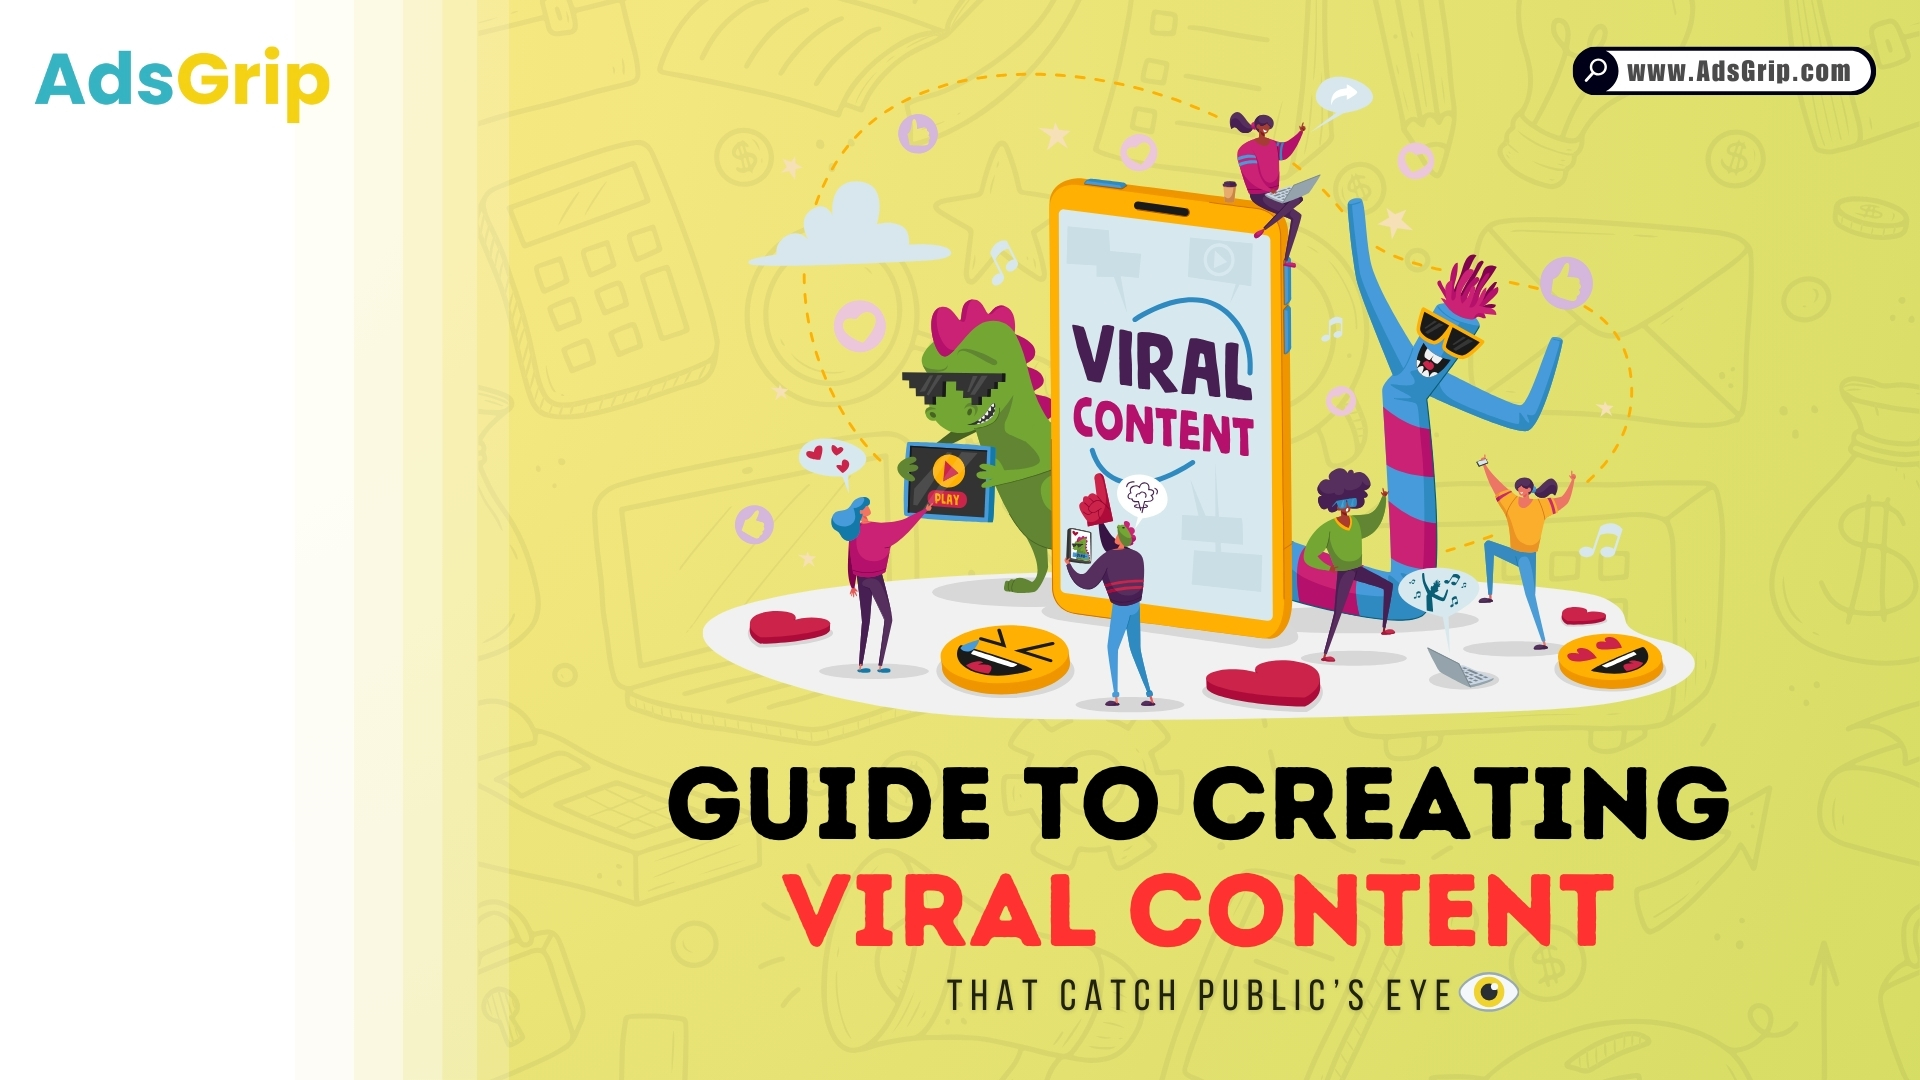 Guide to Creating Viral Content That Catch Public’s Eye